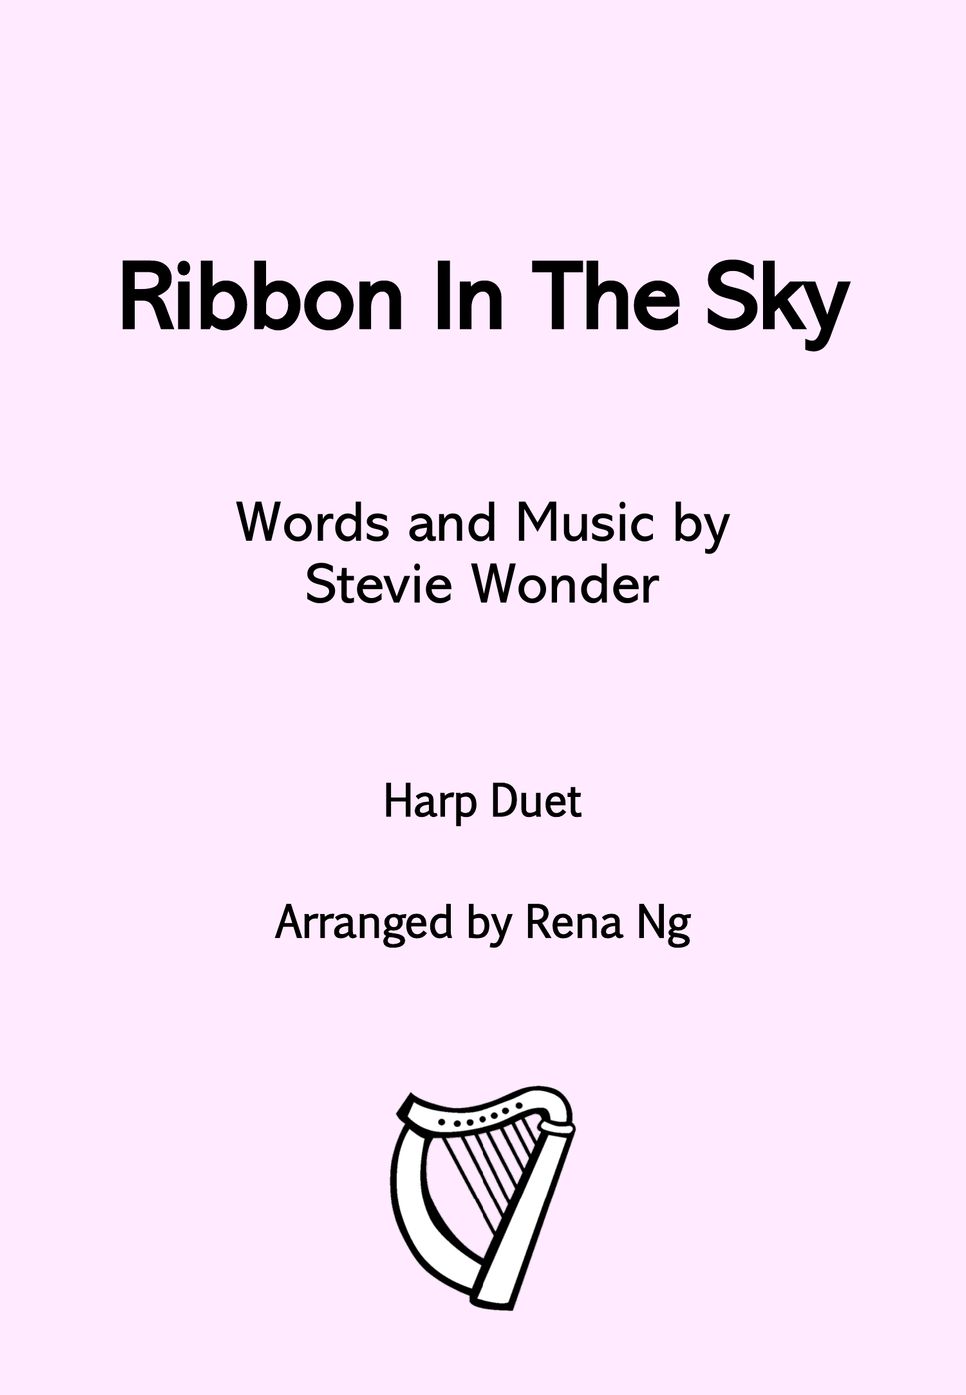 Stevie Wonder - Ribbon in the Sky (Harp Duet) by Harp With Me